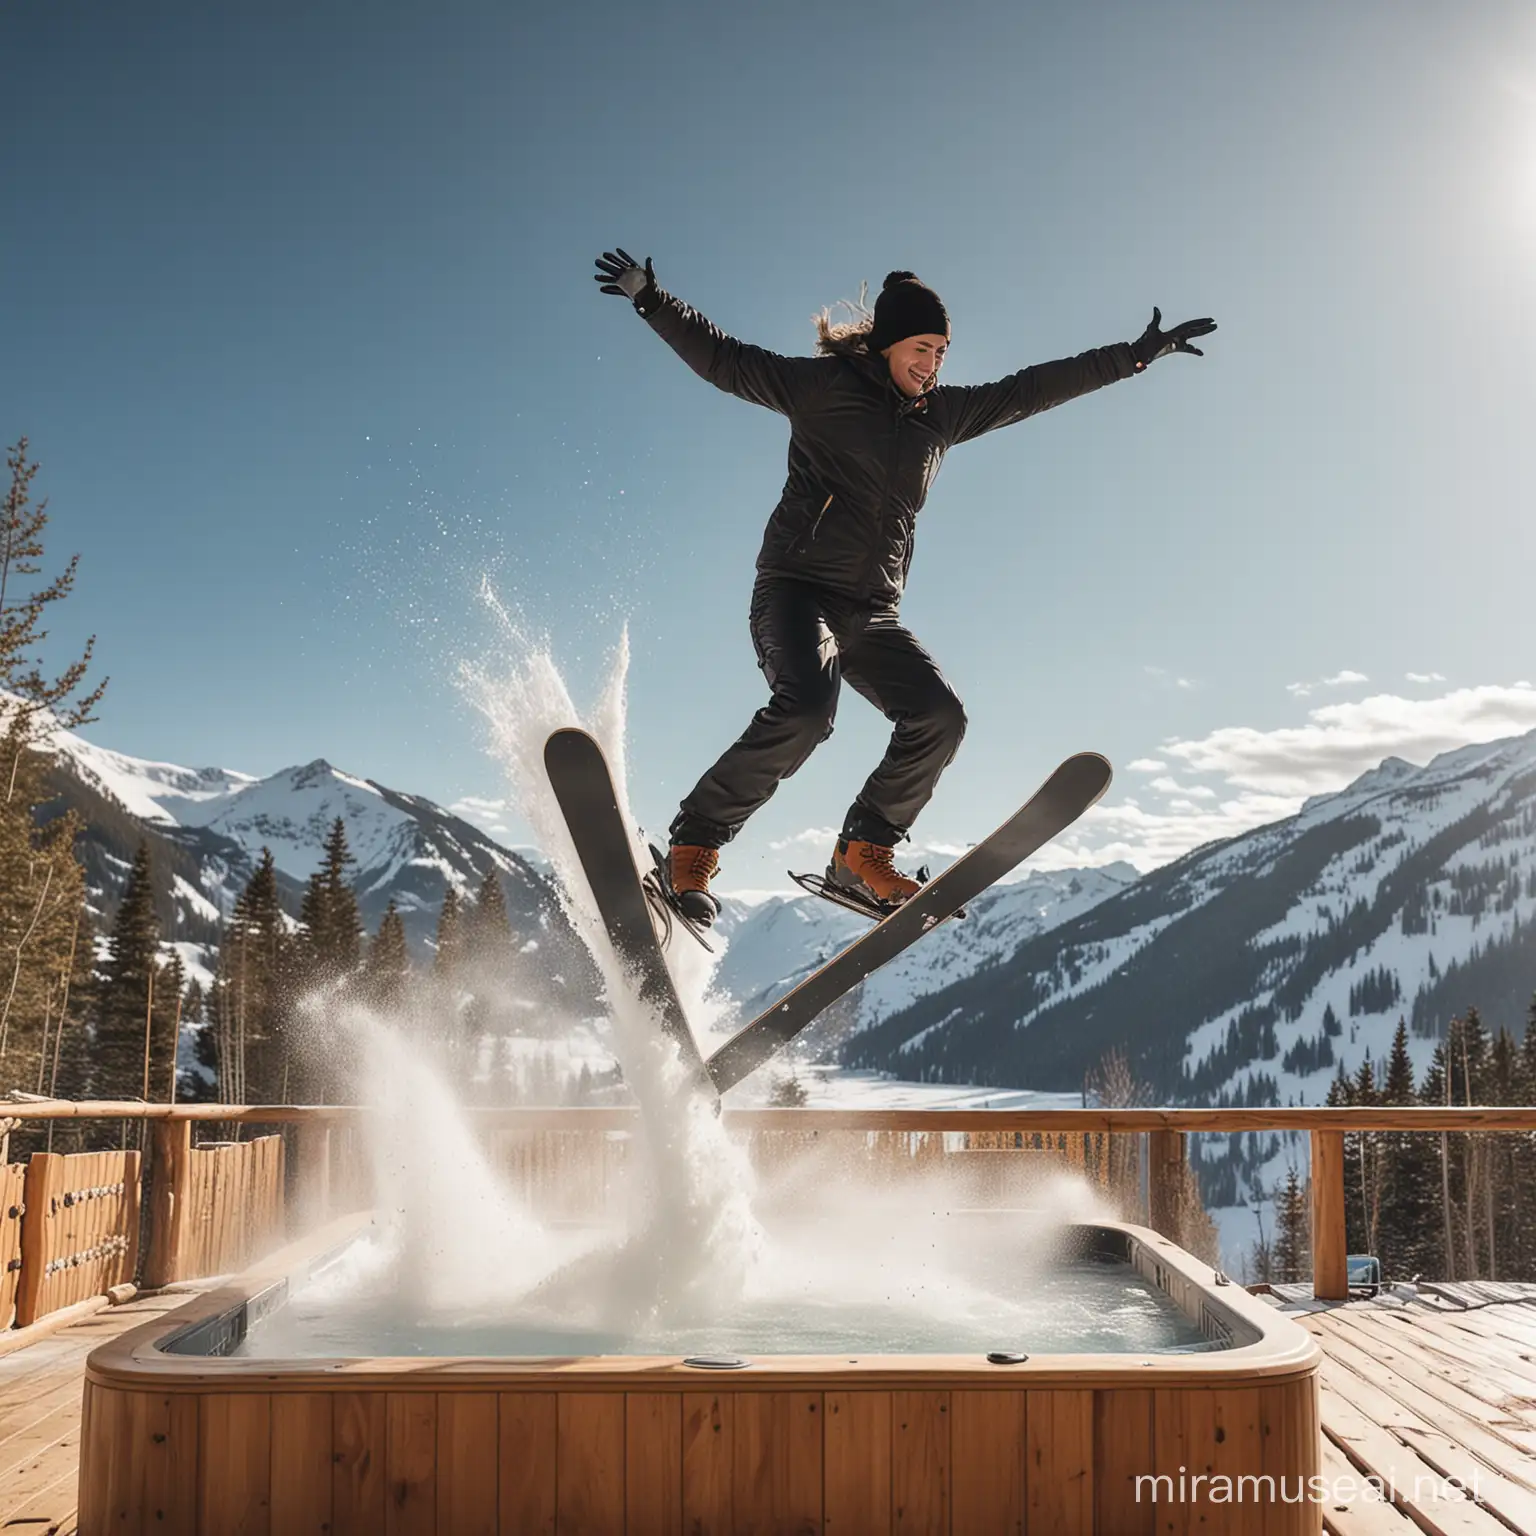 Create an image of a person jumping with a ski over a wooden hot tub.
